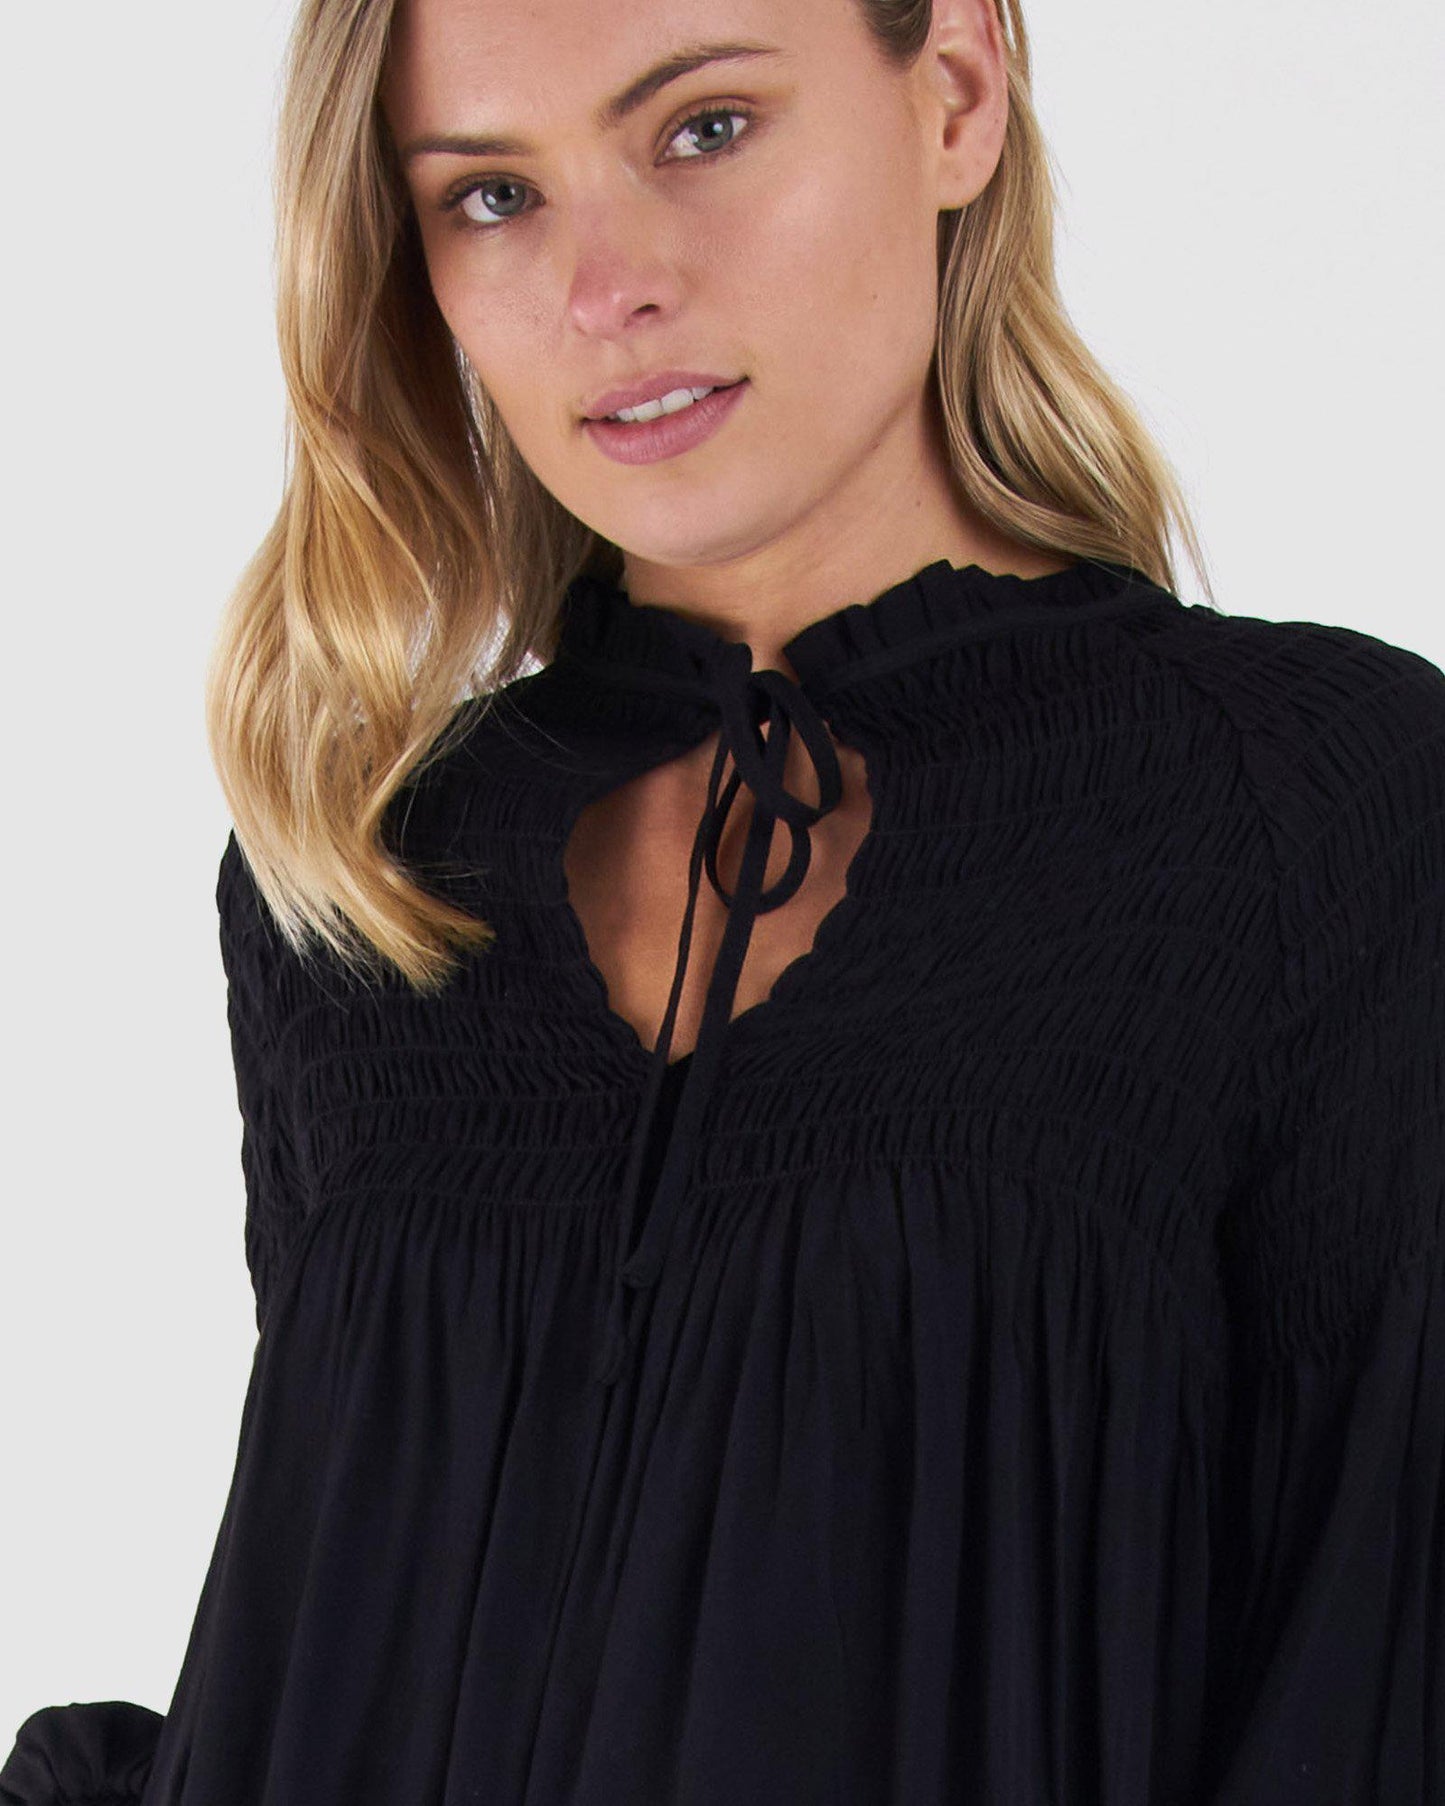 Ada L/S Top - Black - Sass - FUDGE Gifts Home Lifestyle